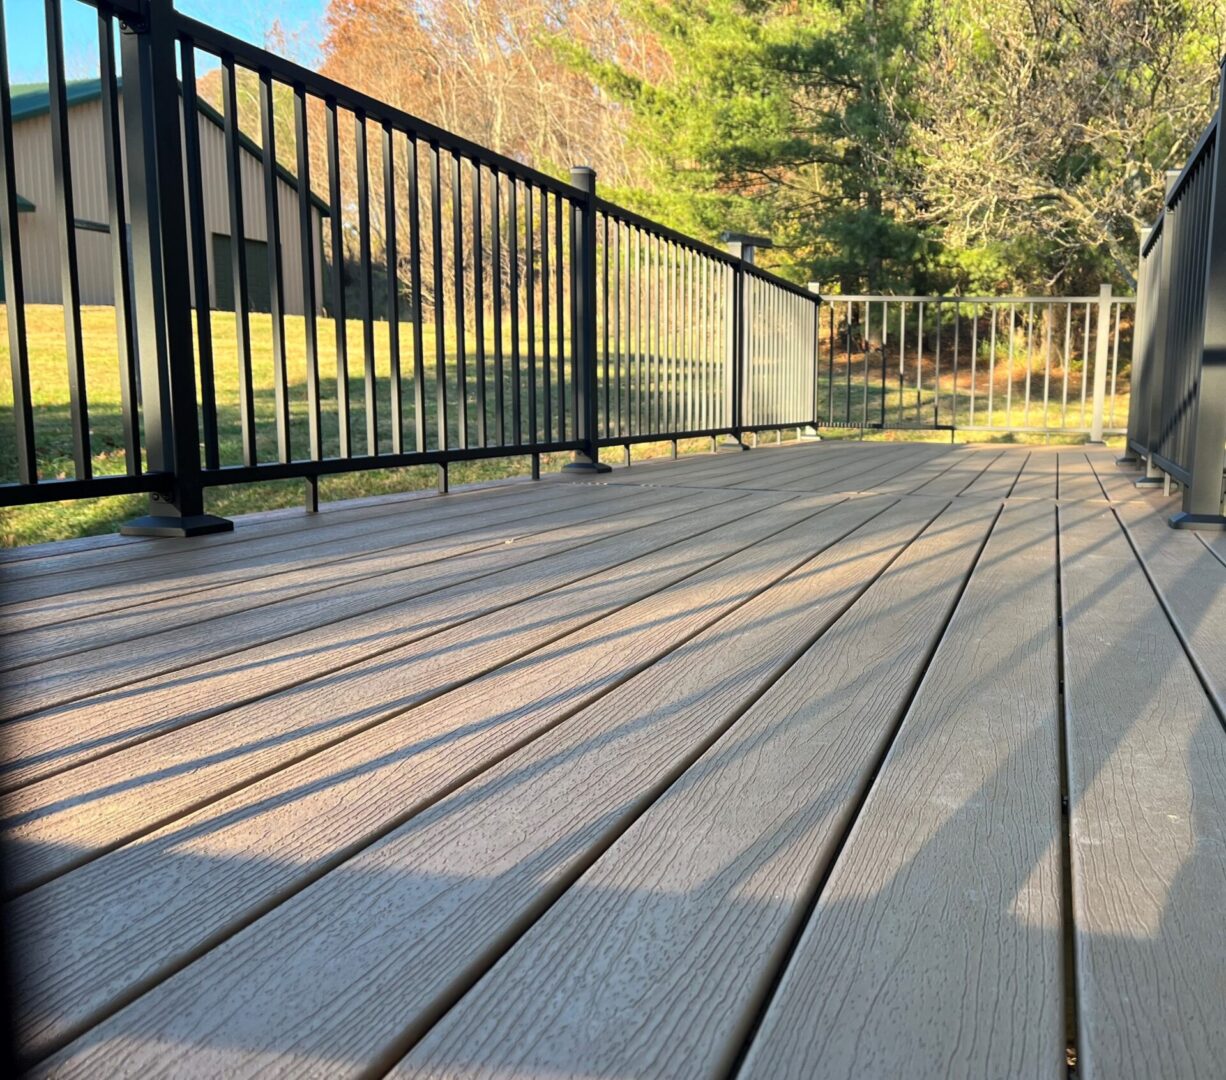 A deck with a railing and trees in the background.